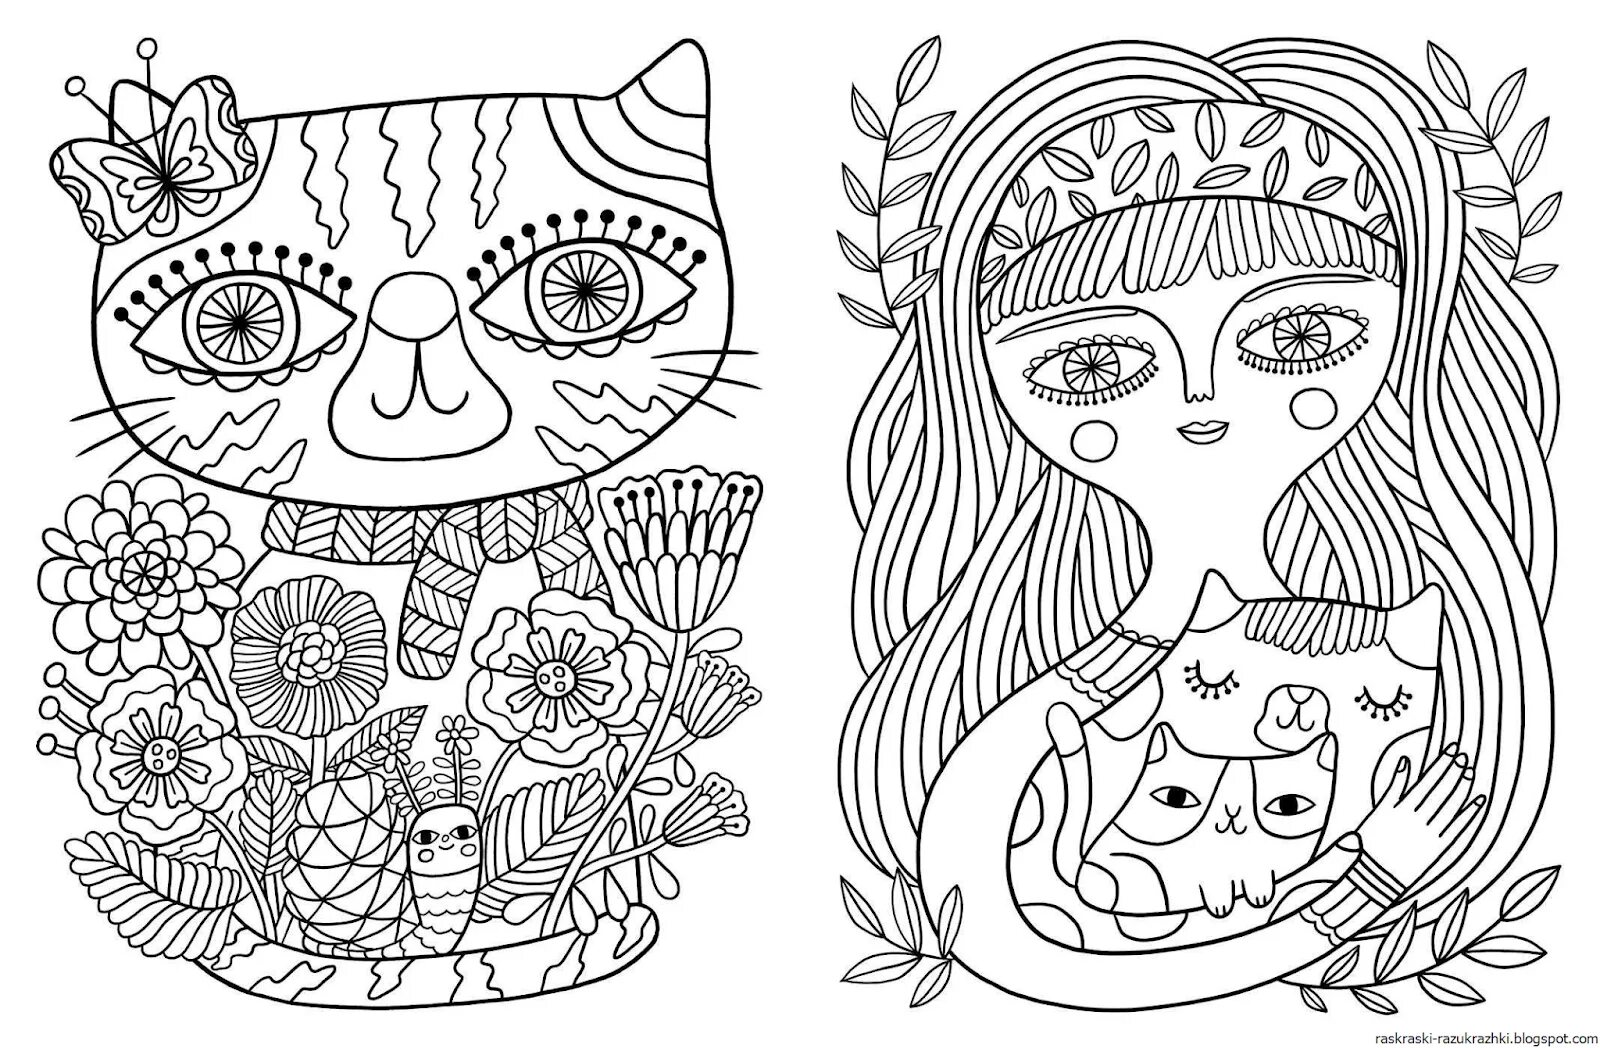 Colorful psychological coloring book for inquisitive creators